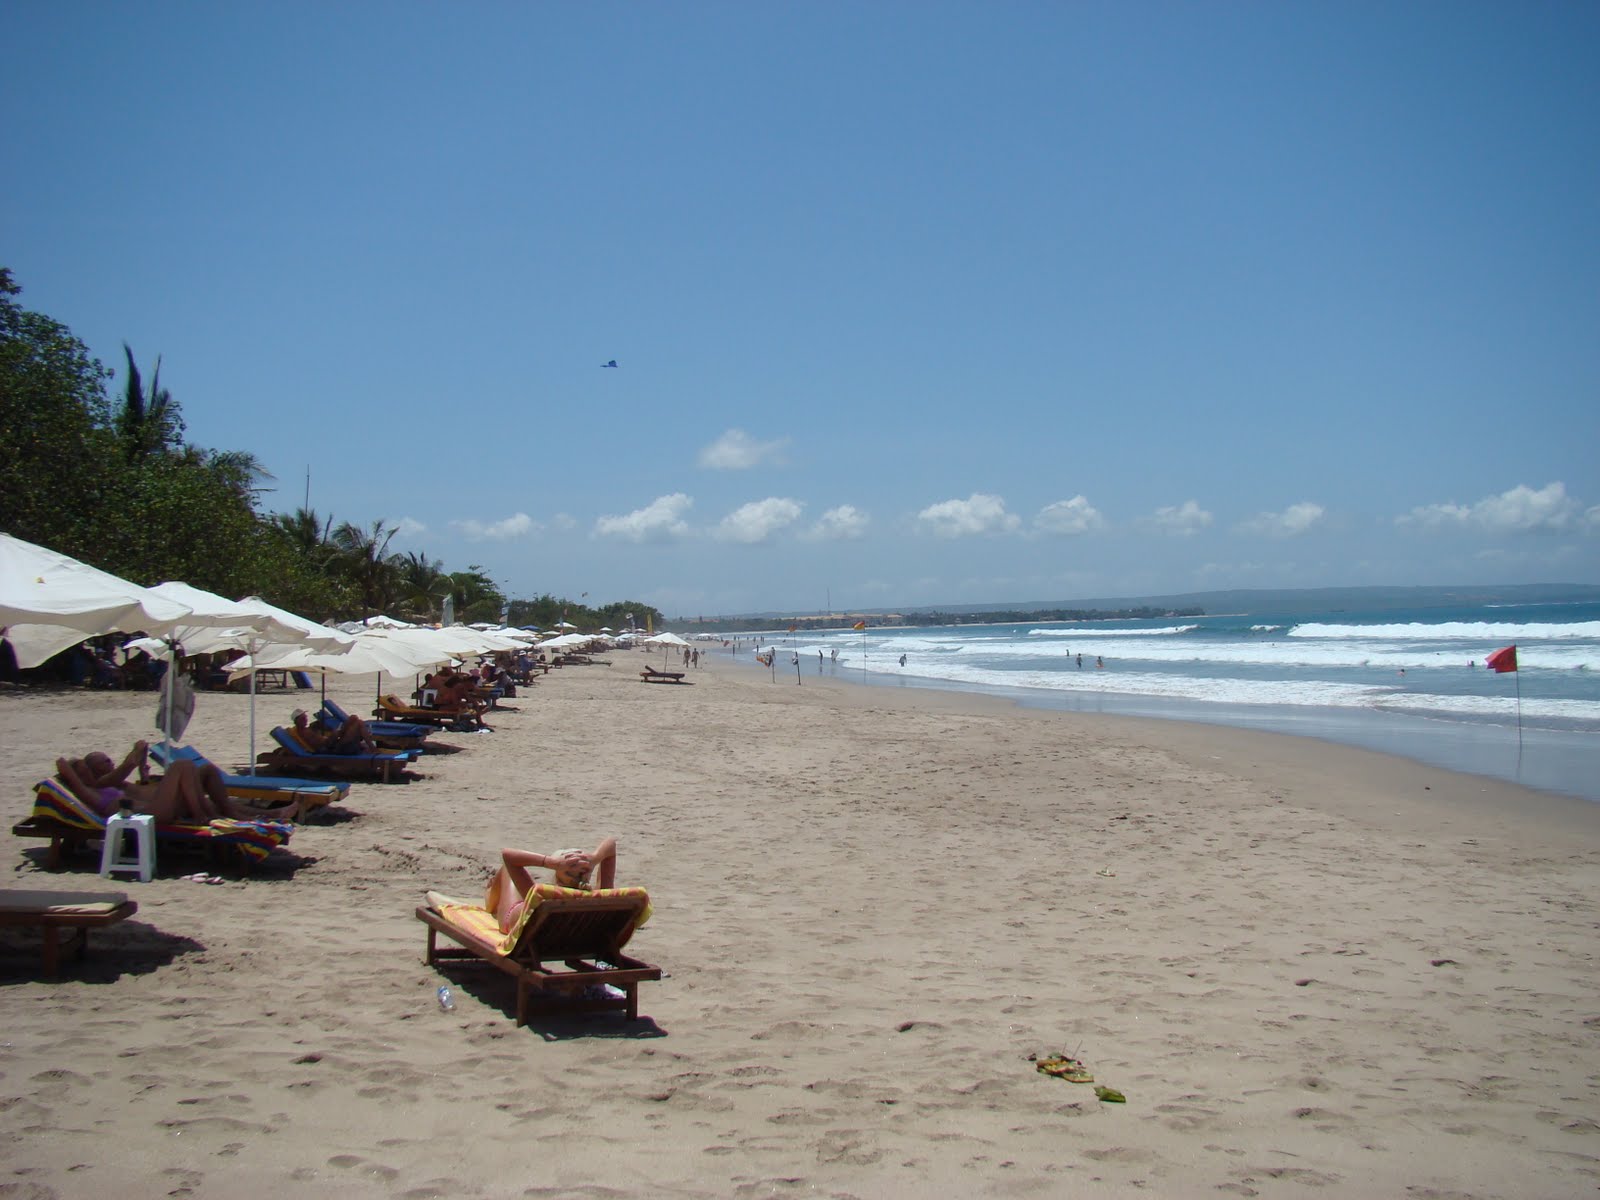  Legian Beach  Bali Indonesia Tour Travel and Vacation Places